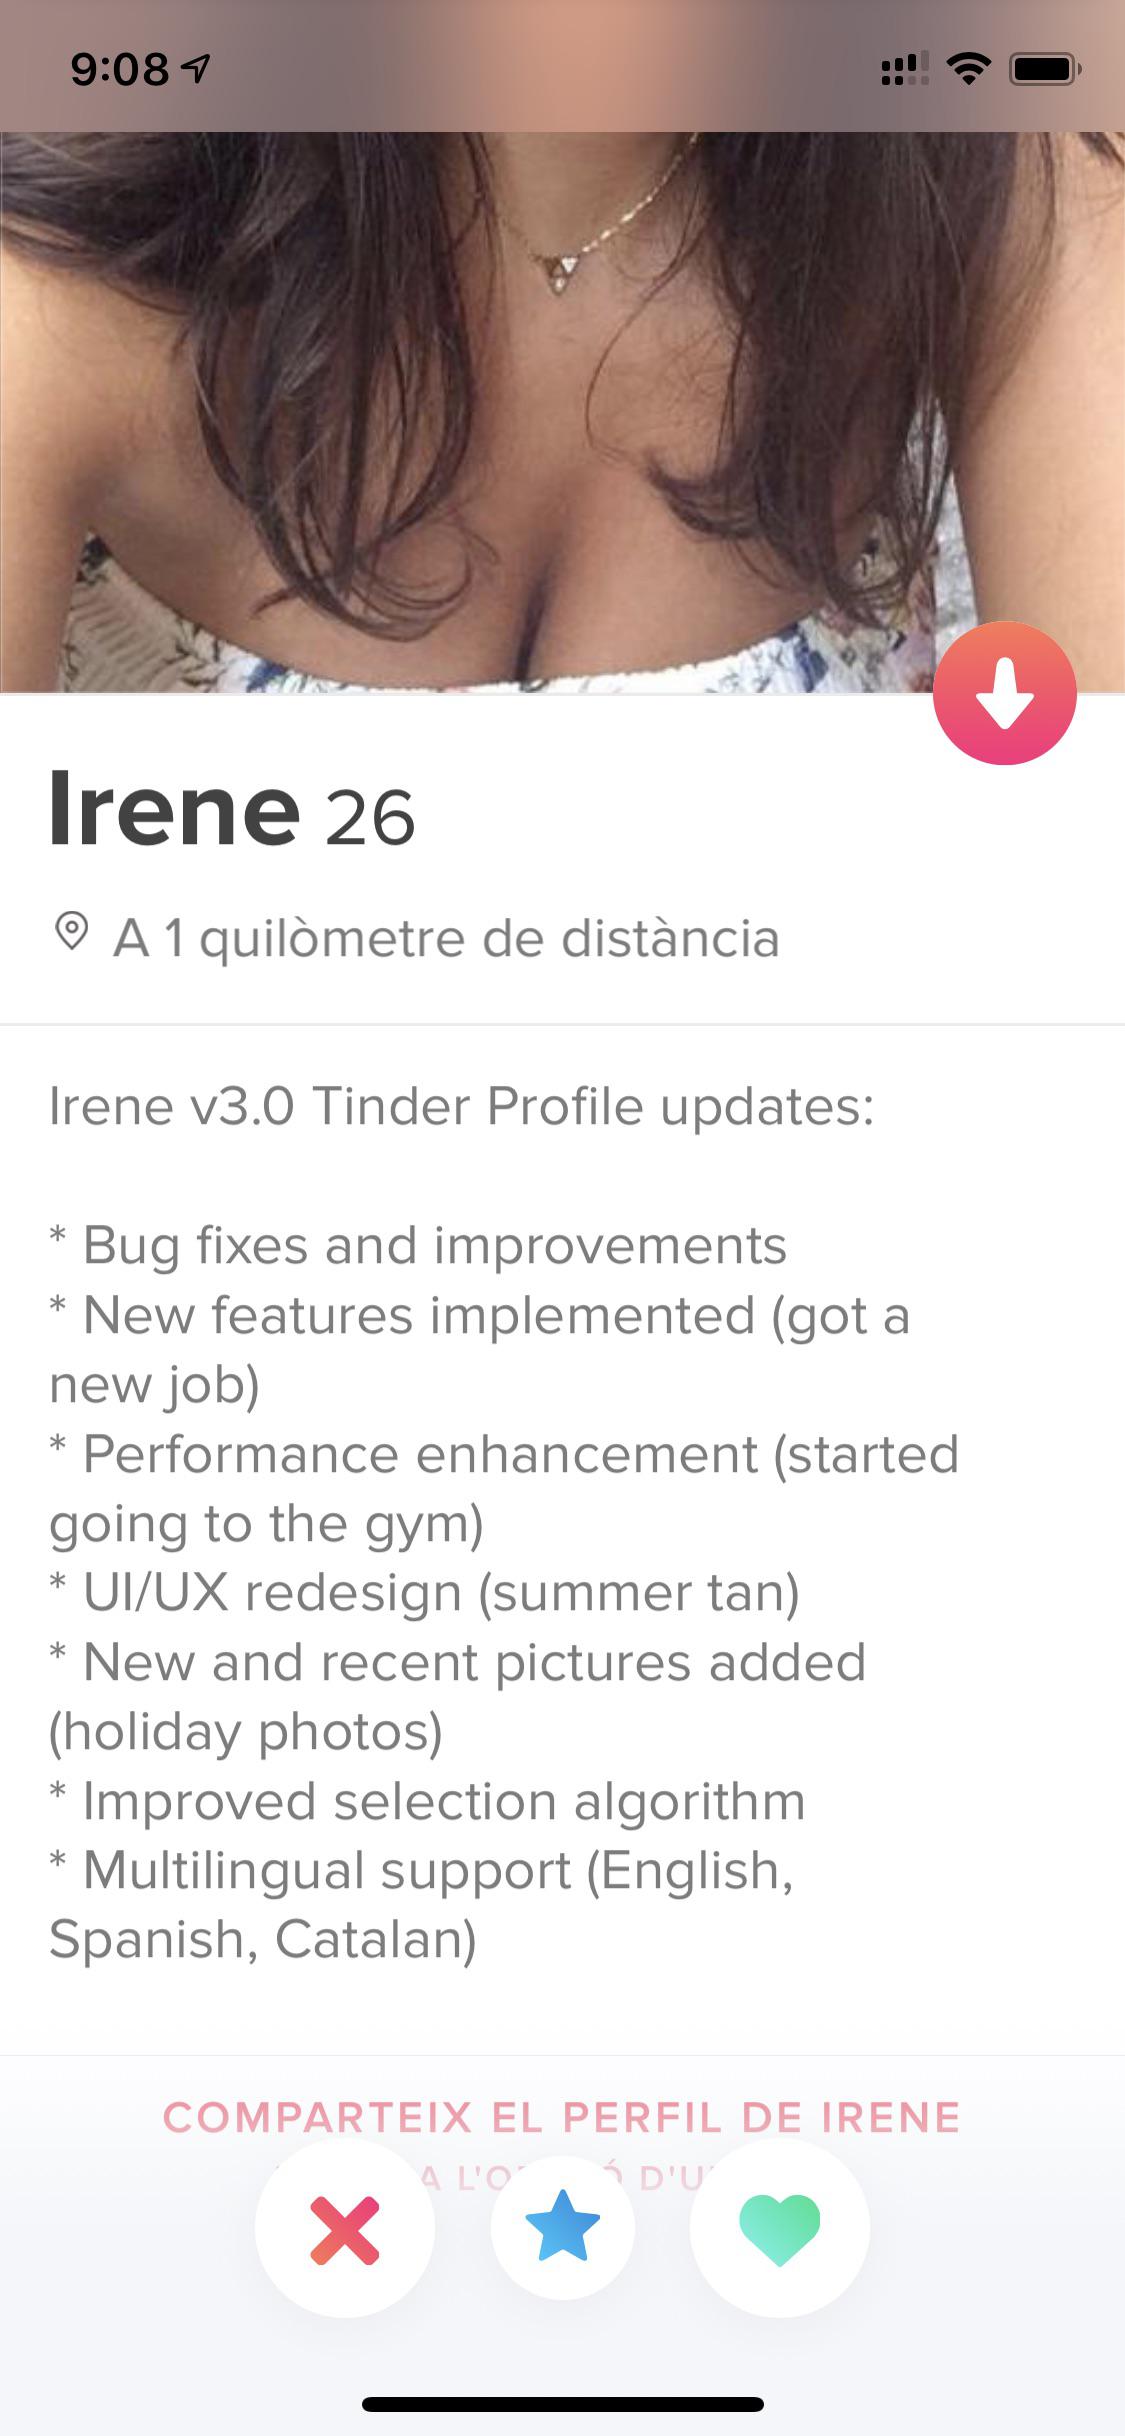 Funny tinder profile - beauty - Irene 26 A1 quilmetre de distncia Irene v3.0 Tinder Profile updates Bug fixes and improvements New features implemented got a new job Performance enhancement started going to the gym UiUx redesign summer tan New and recent 